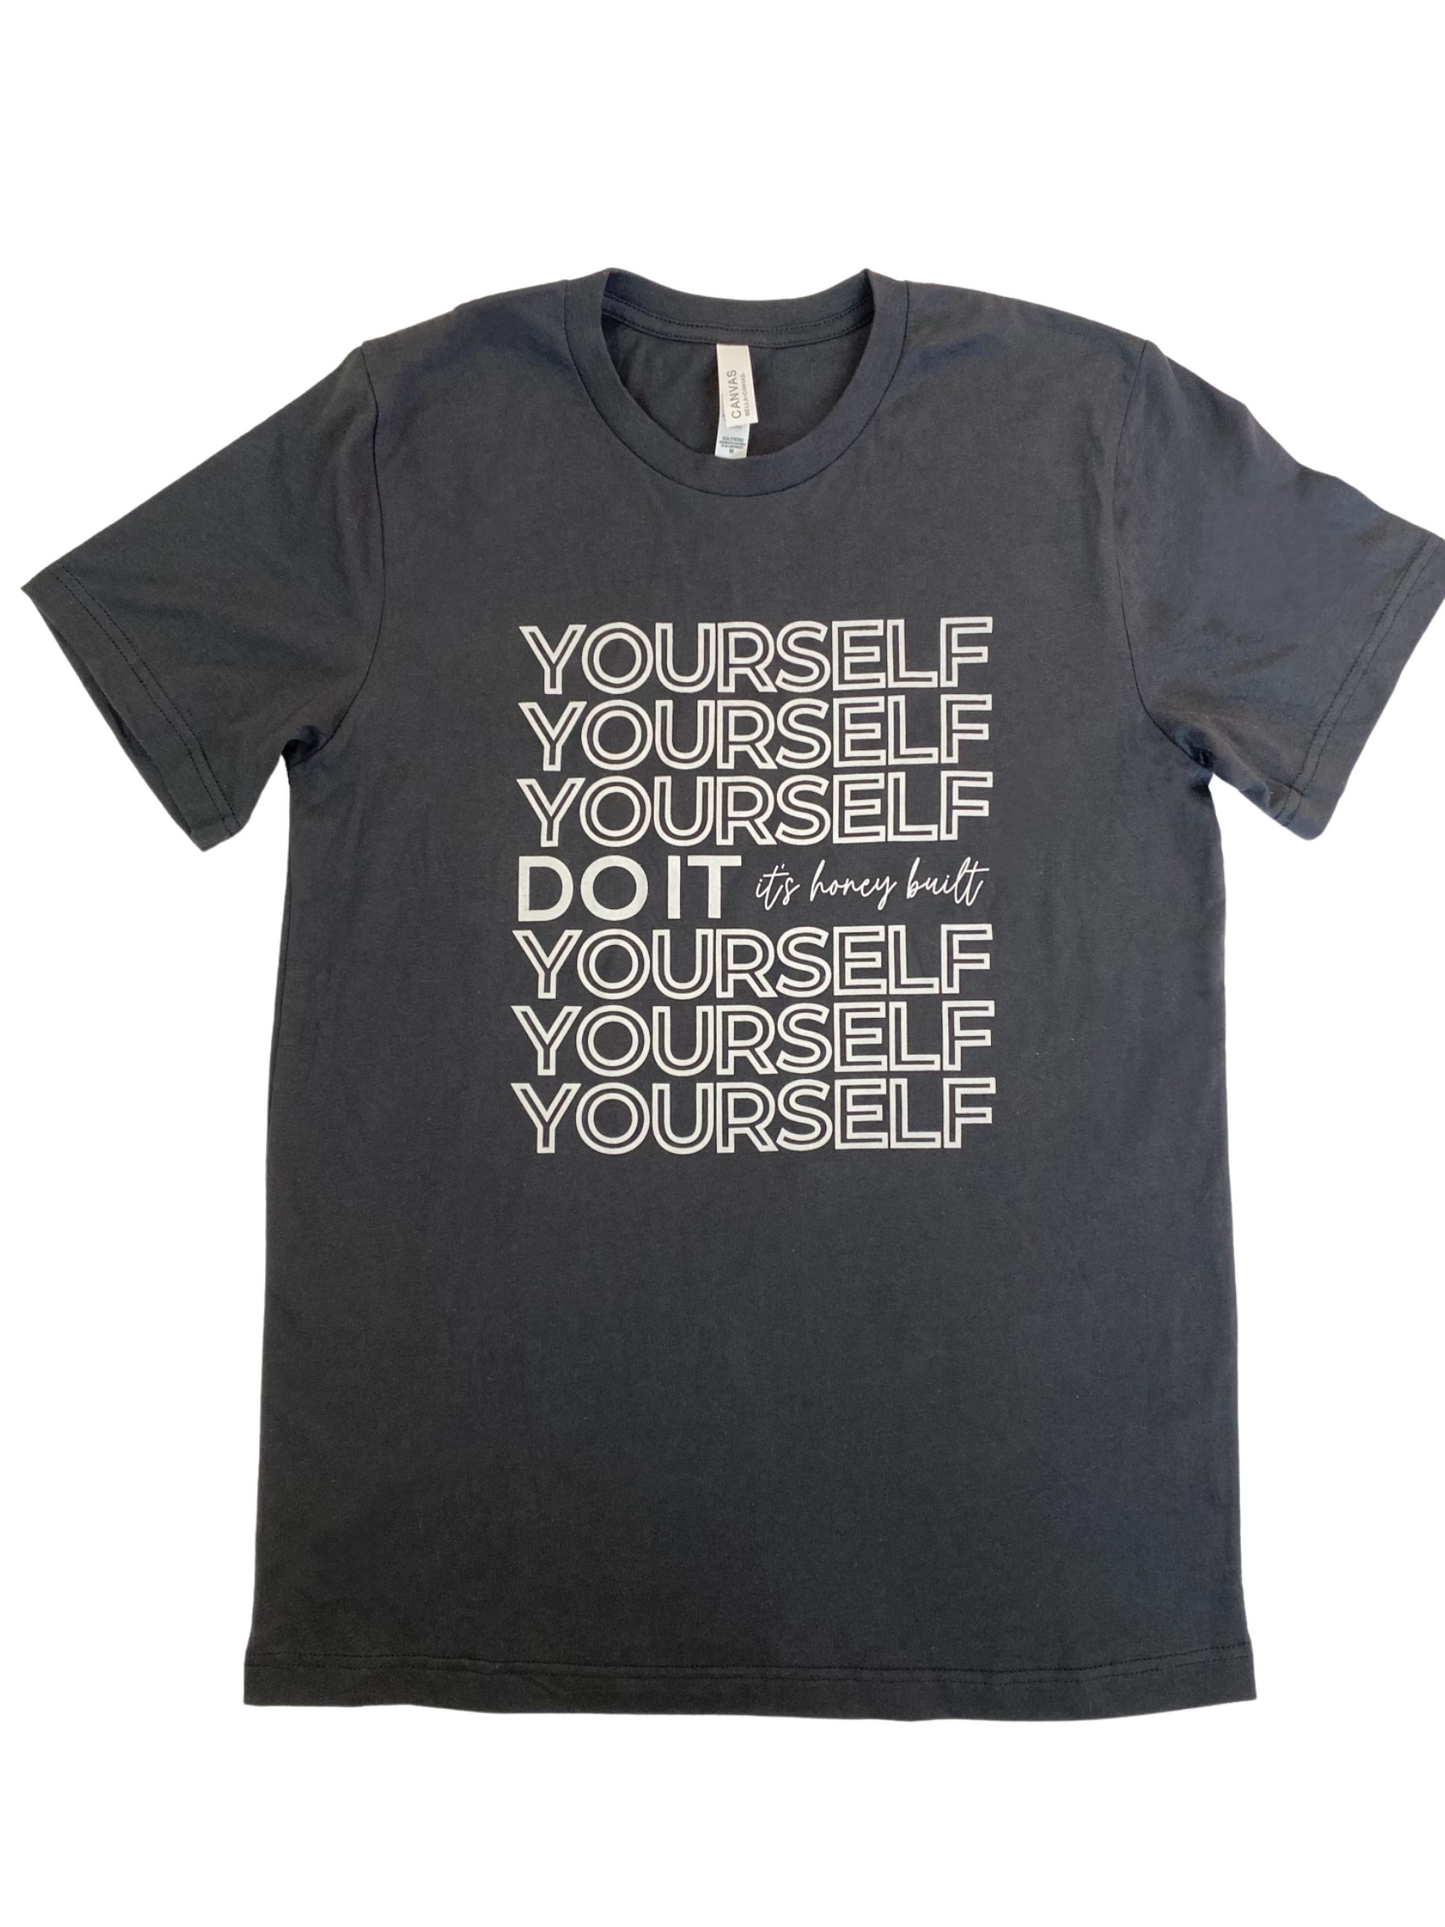 Do It Yourself - Short Sleeve